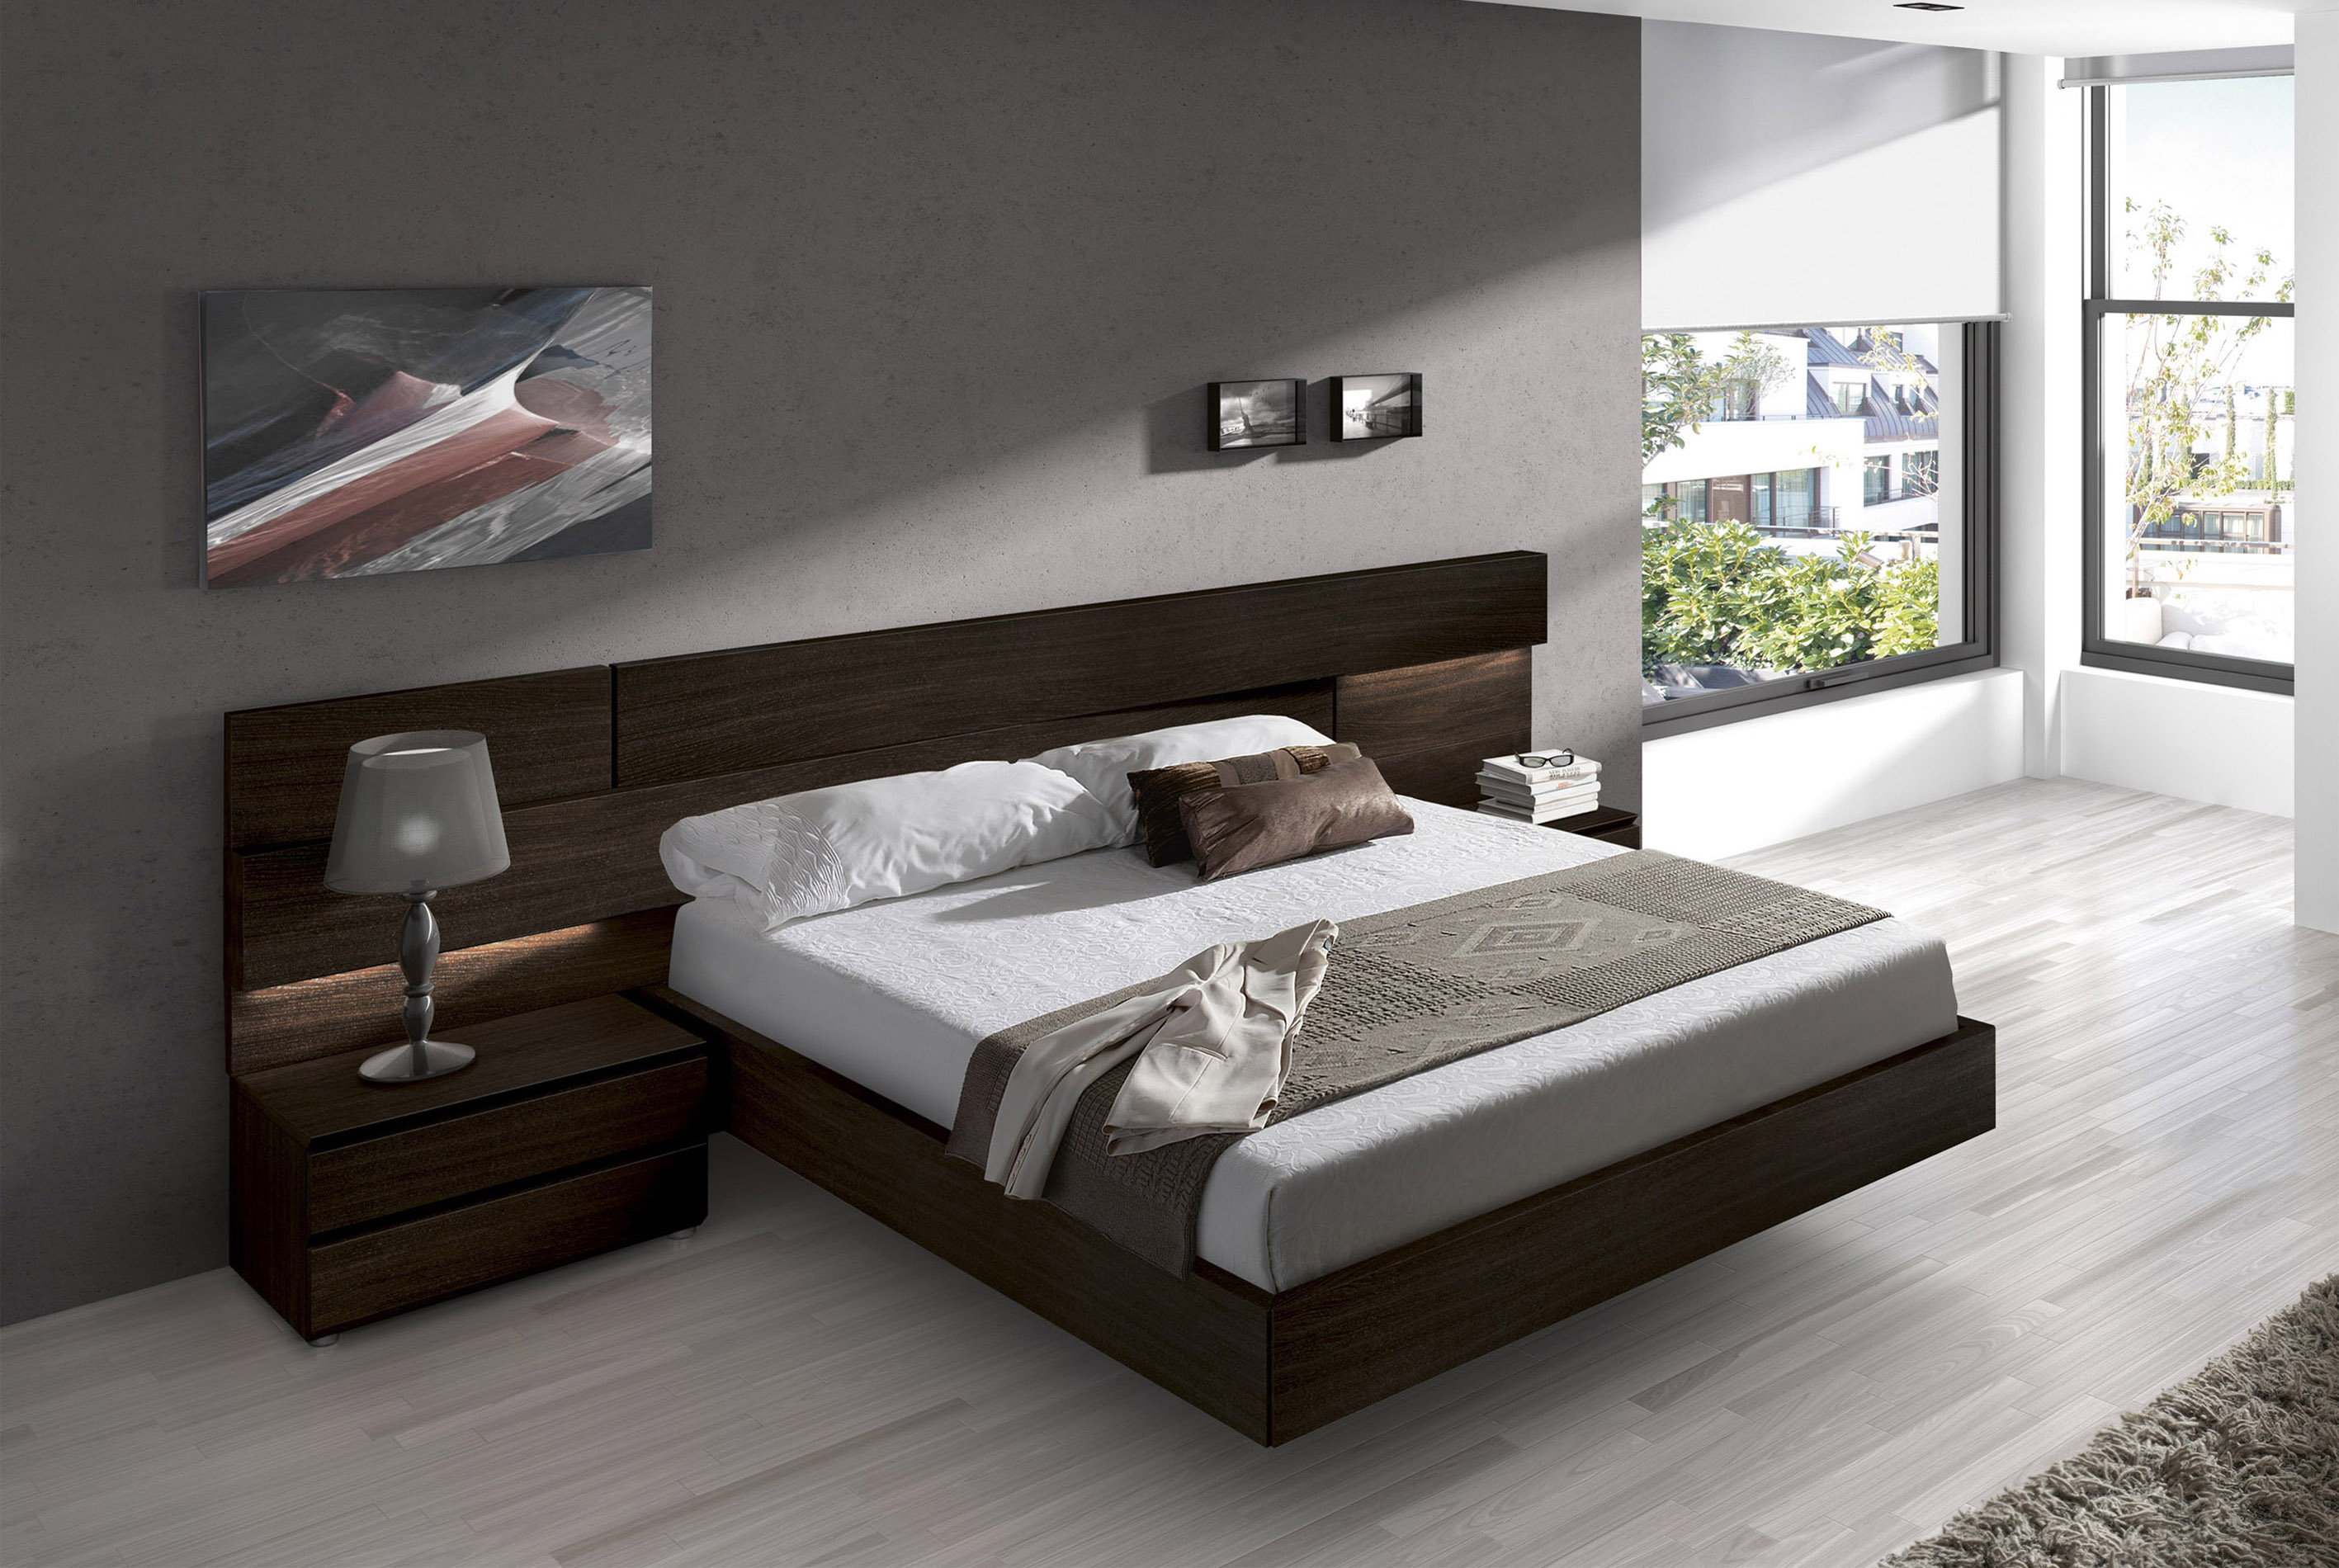 Made in Spain Wood High End Platform Bed with Extra Storage Philadelphia Pennsylvania GC508